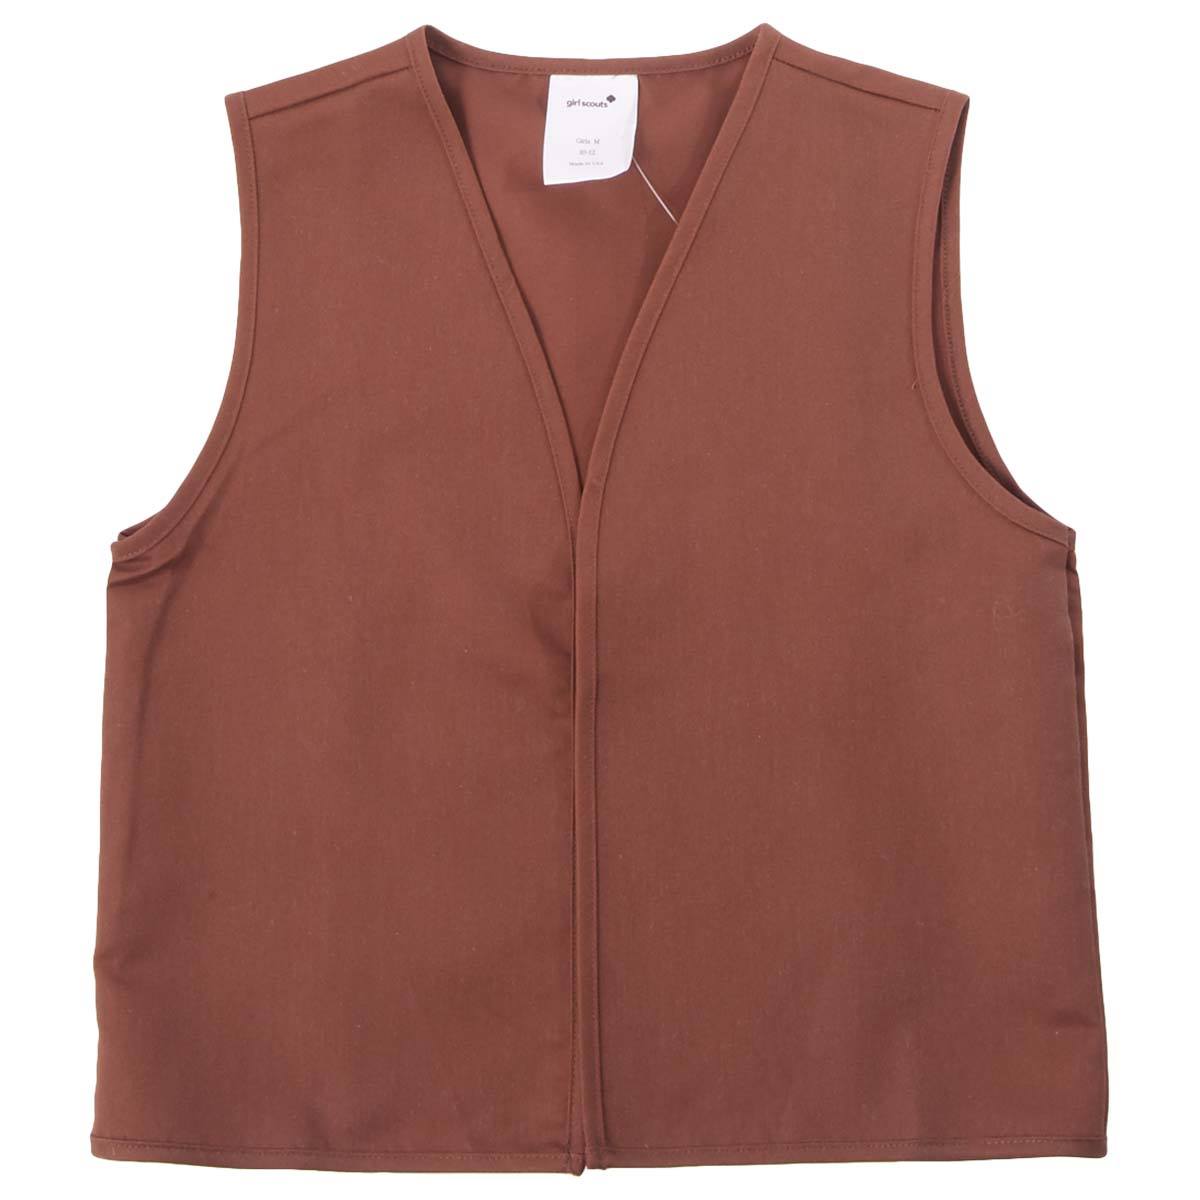 Girl Scouts Brownie Vest